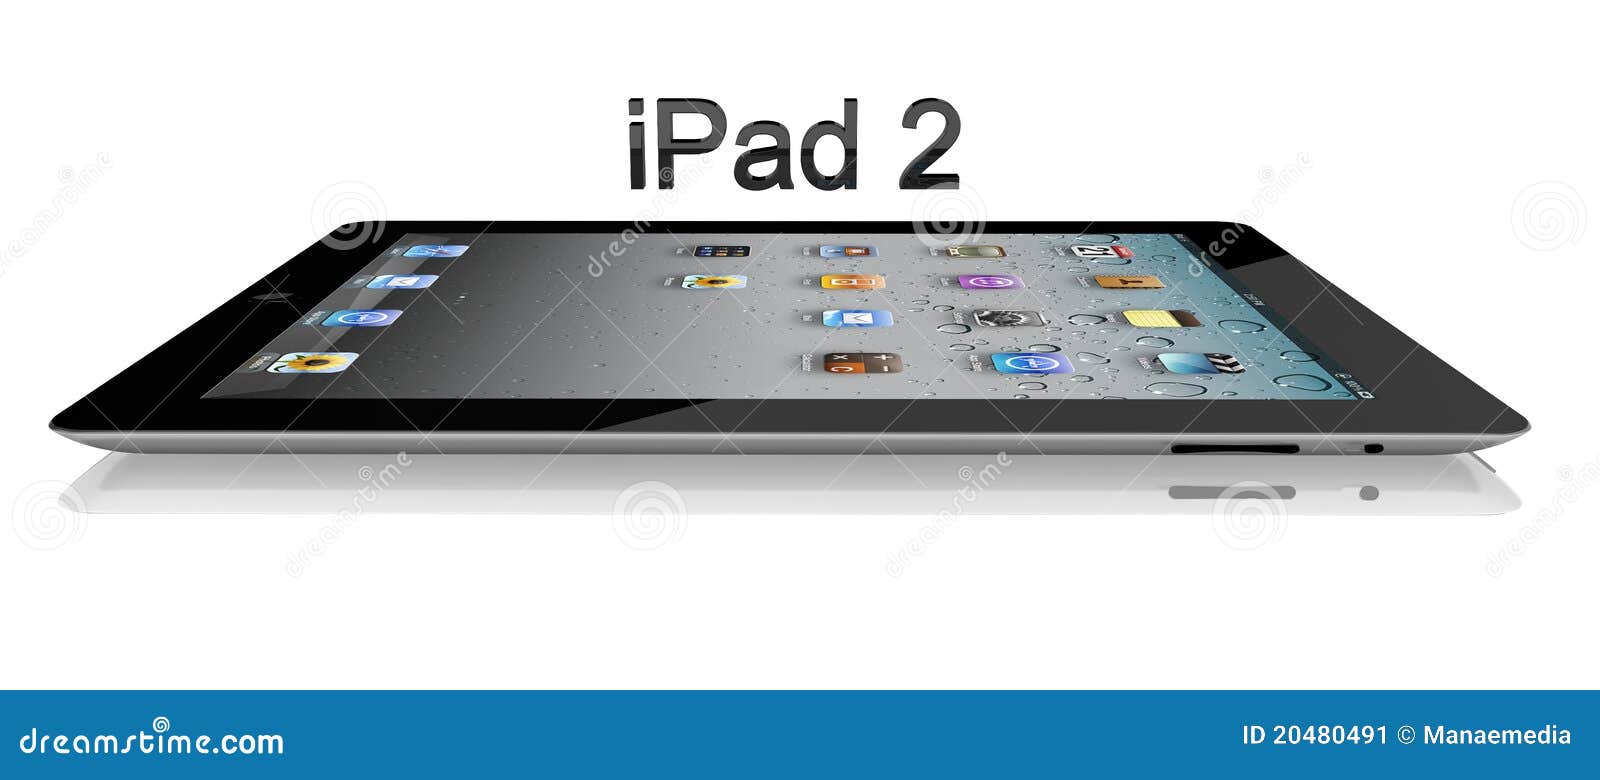 ipad 2 16 GB 3G with two cameras : ipad 2 16gb 3g on Rediff Pages